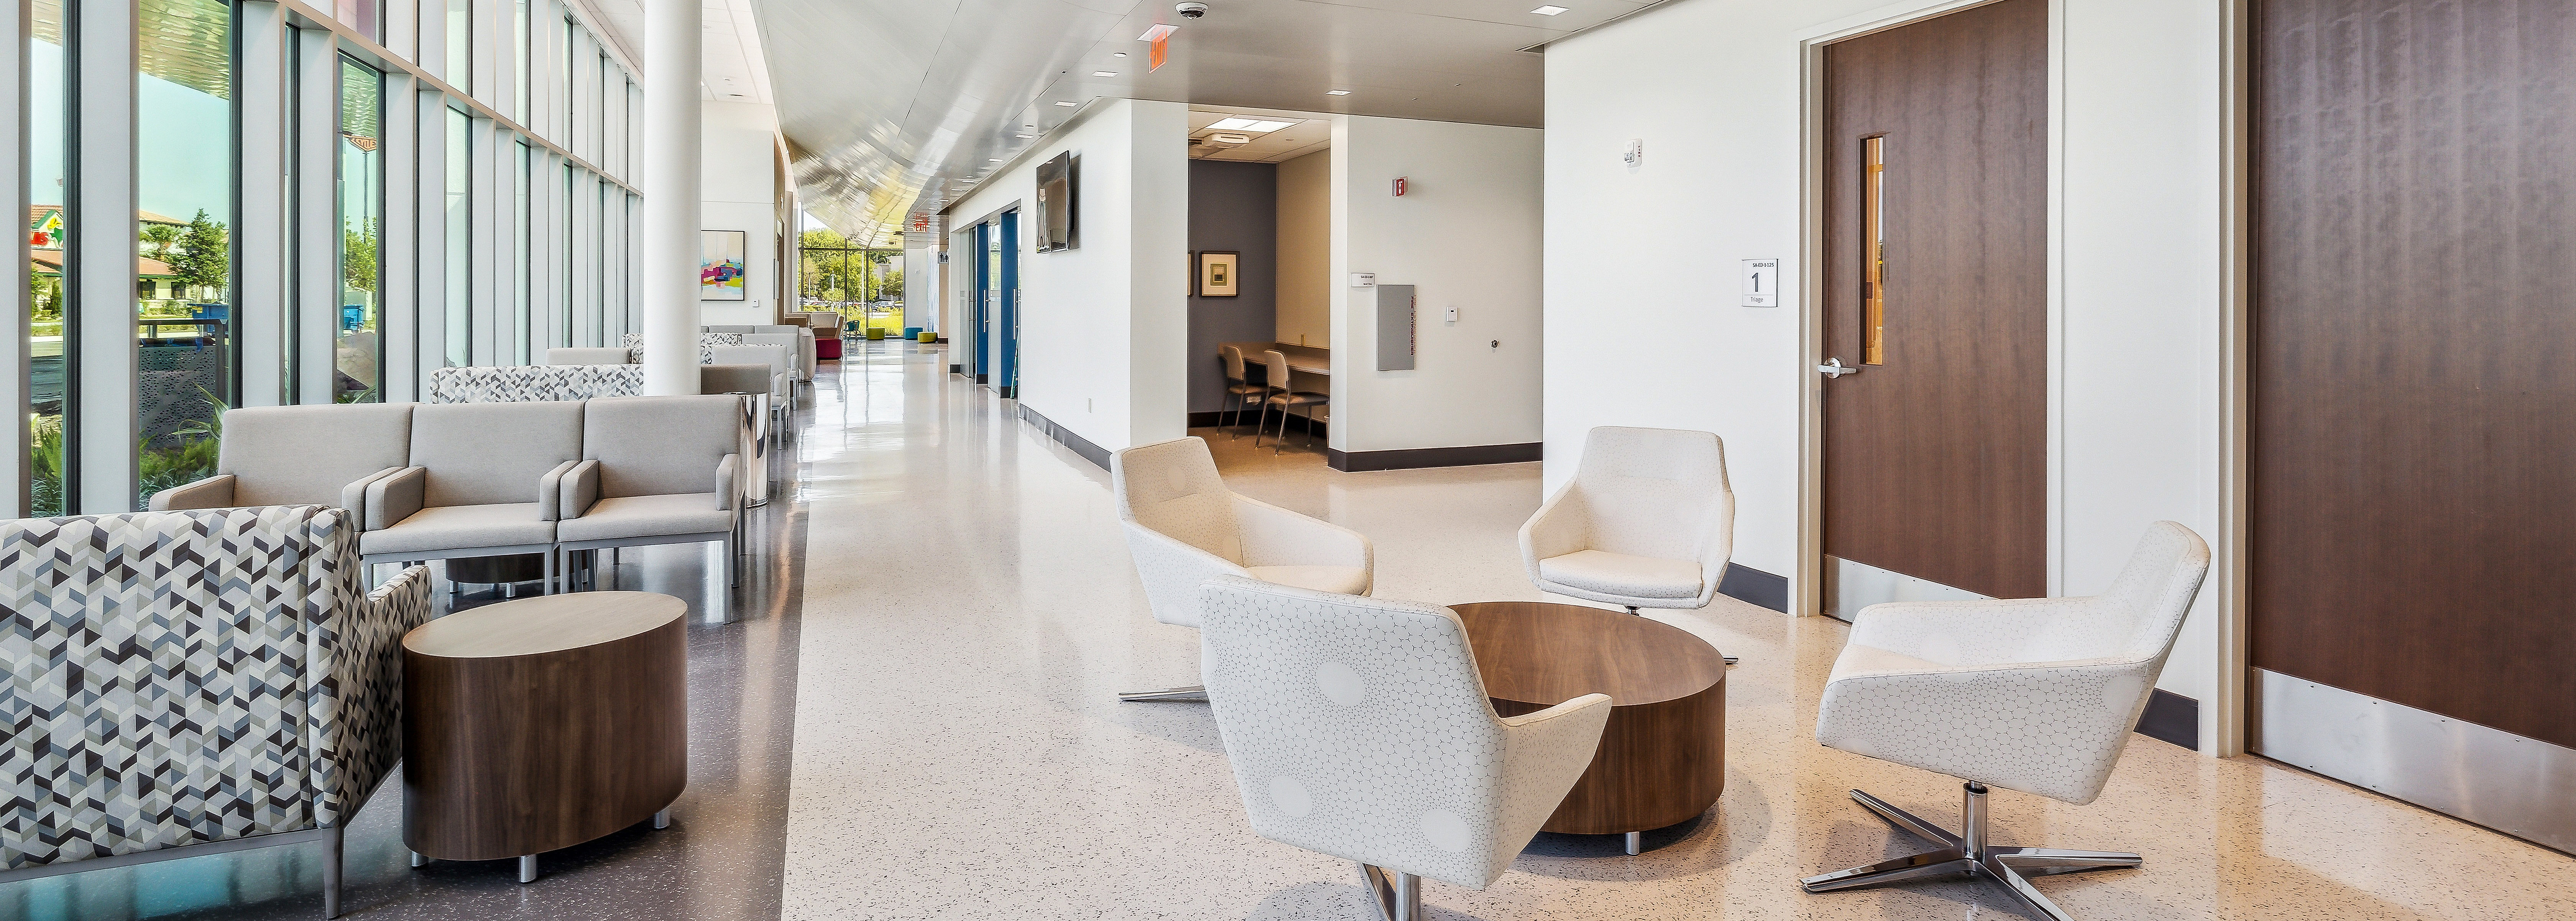 interior lobby of Baptist and Wolfson emergency and imaging center